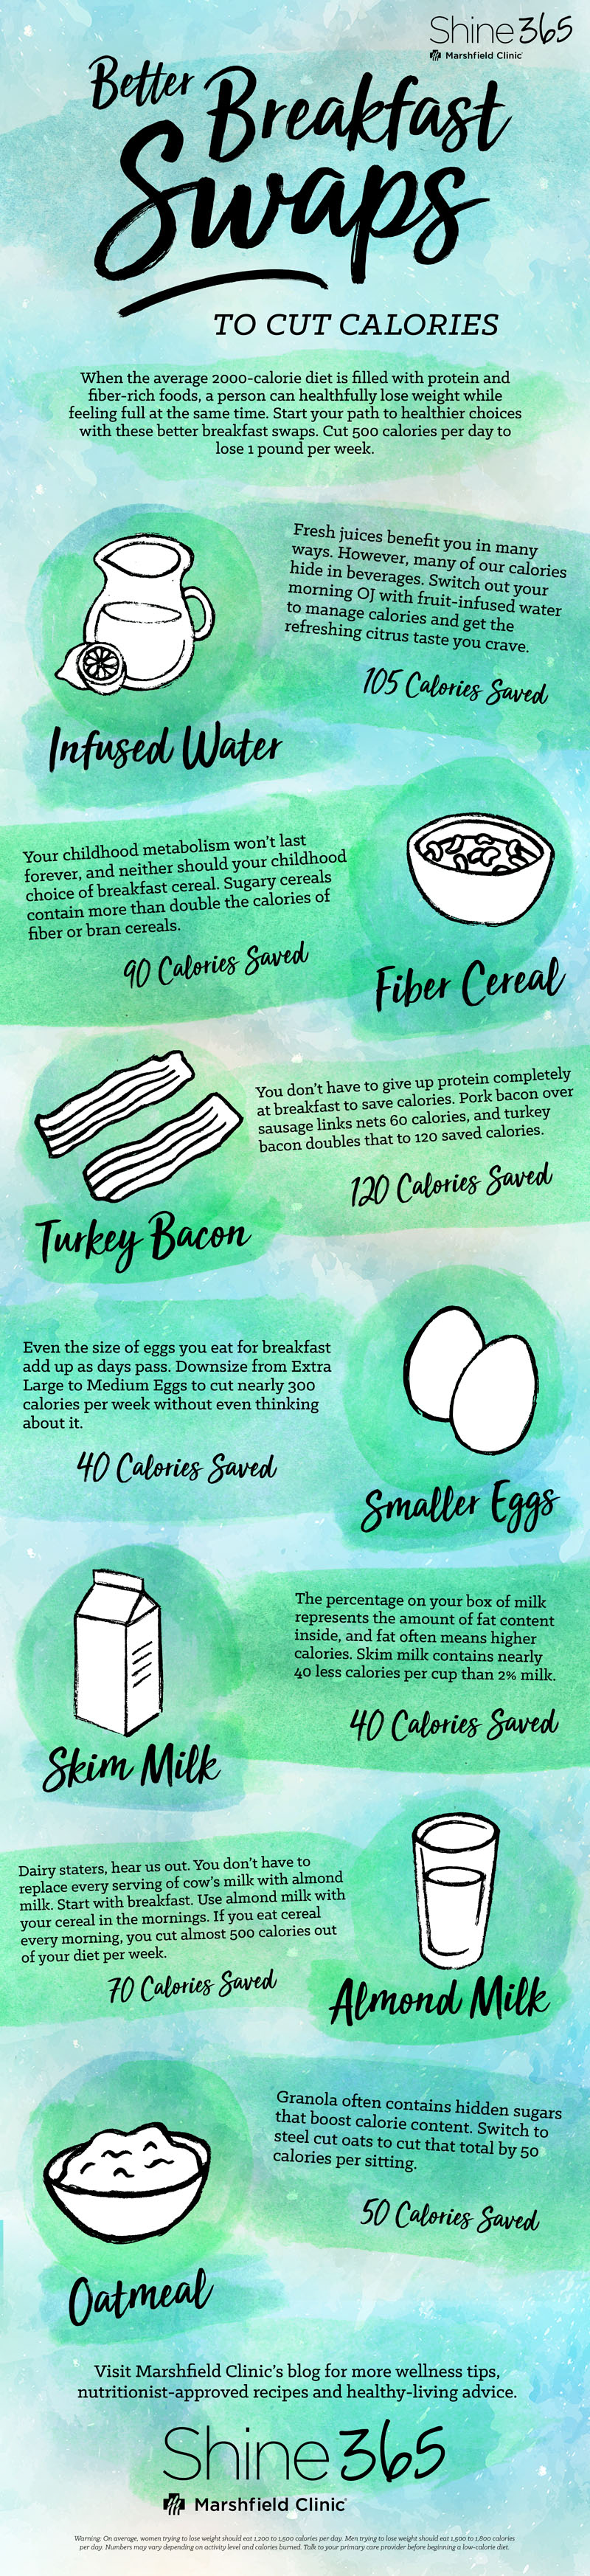 Better Breakfast Swaps, Calorie-cutting infographic